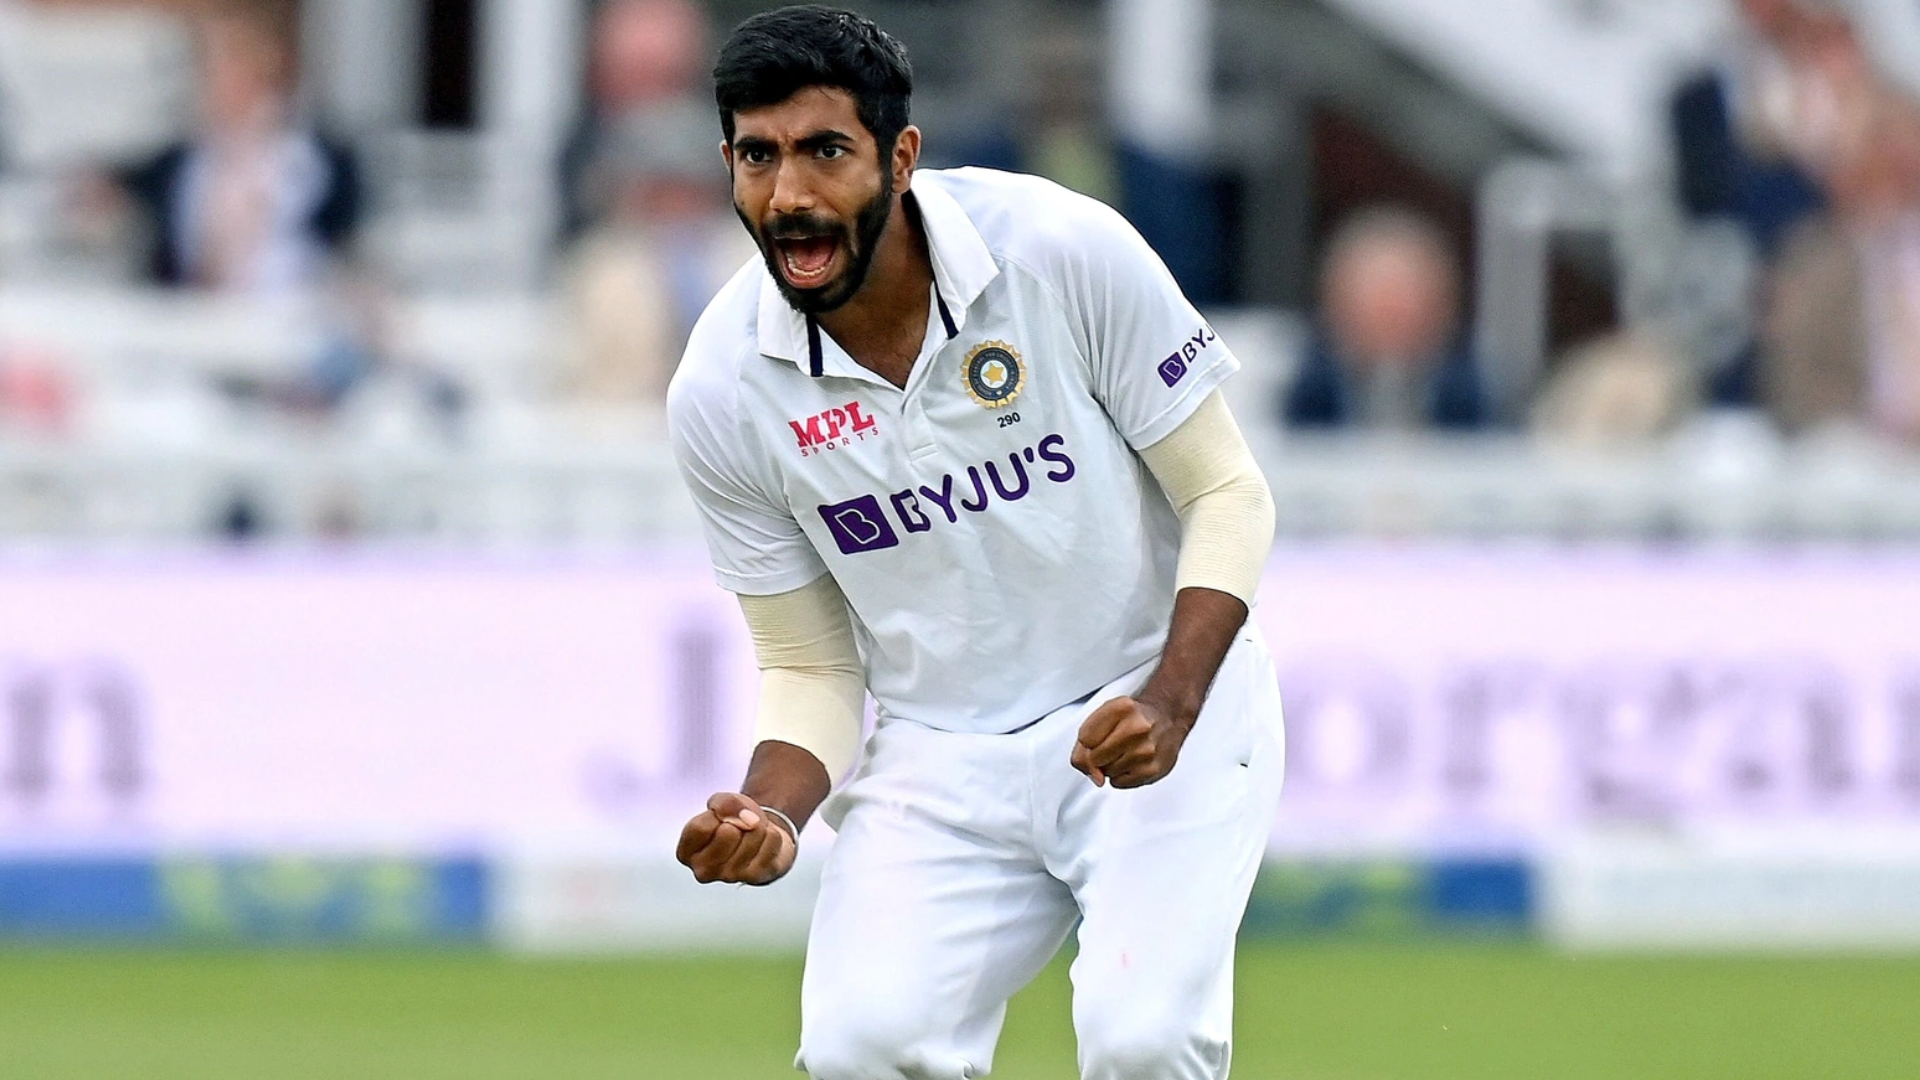 'Bumrah Should Not Play Test Cricket, With T20s He Can Earn Money With An Extended Career'